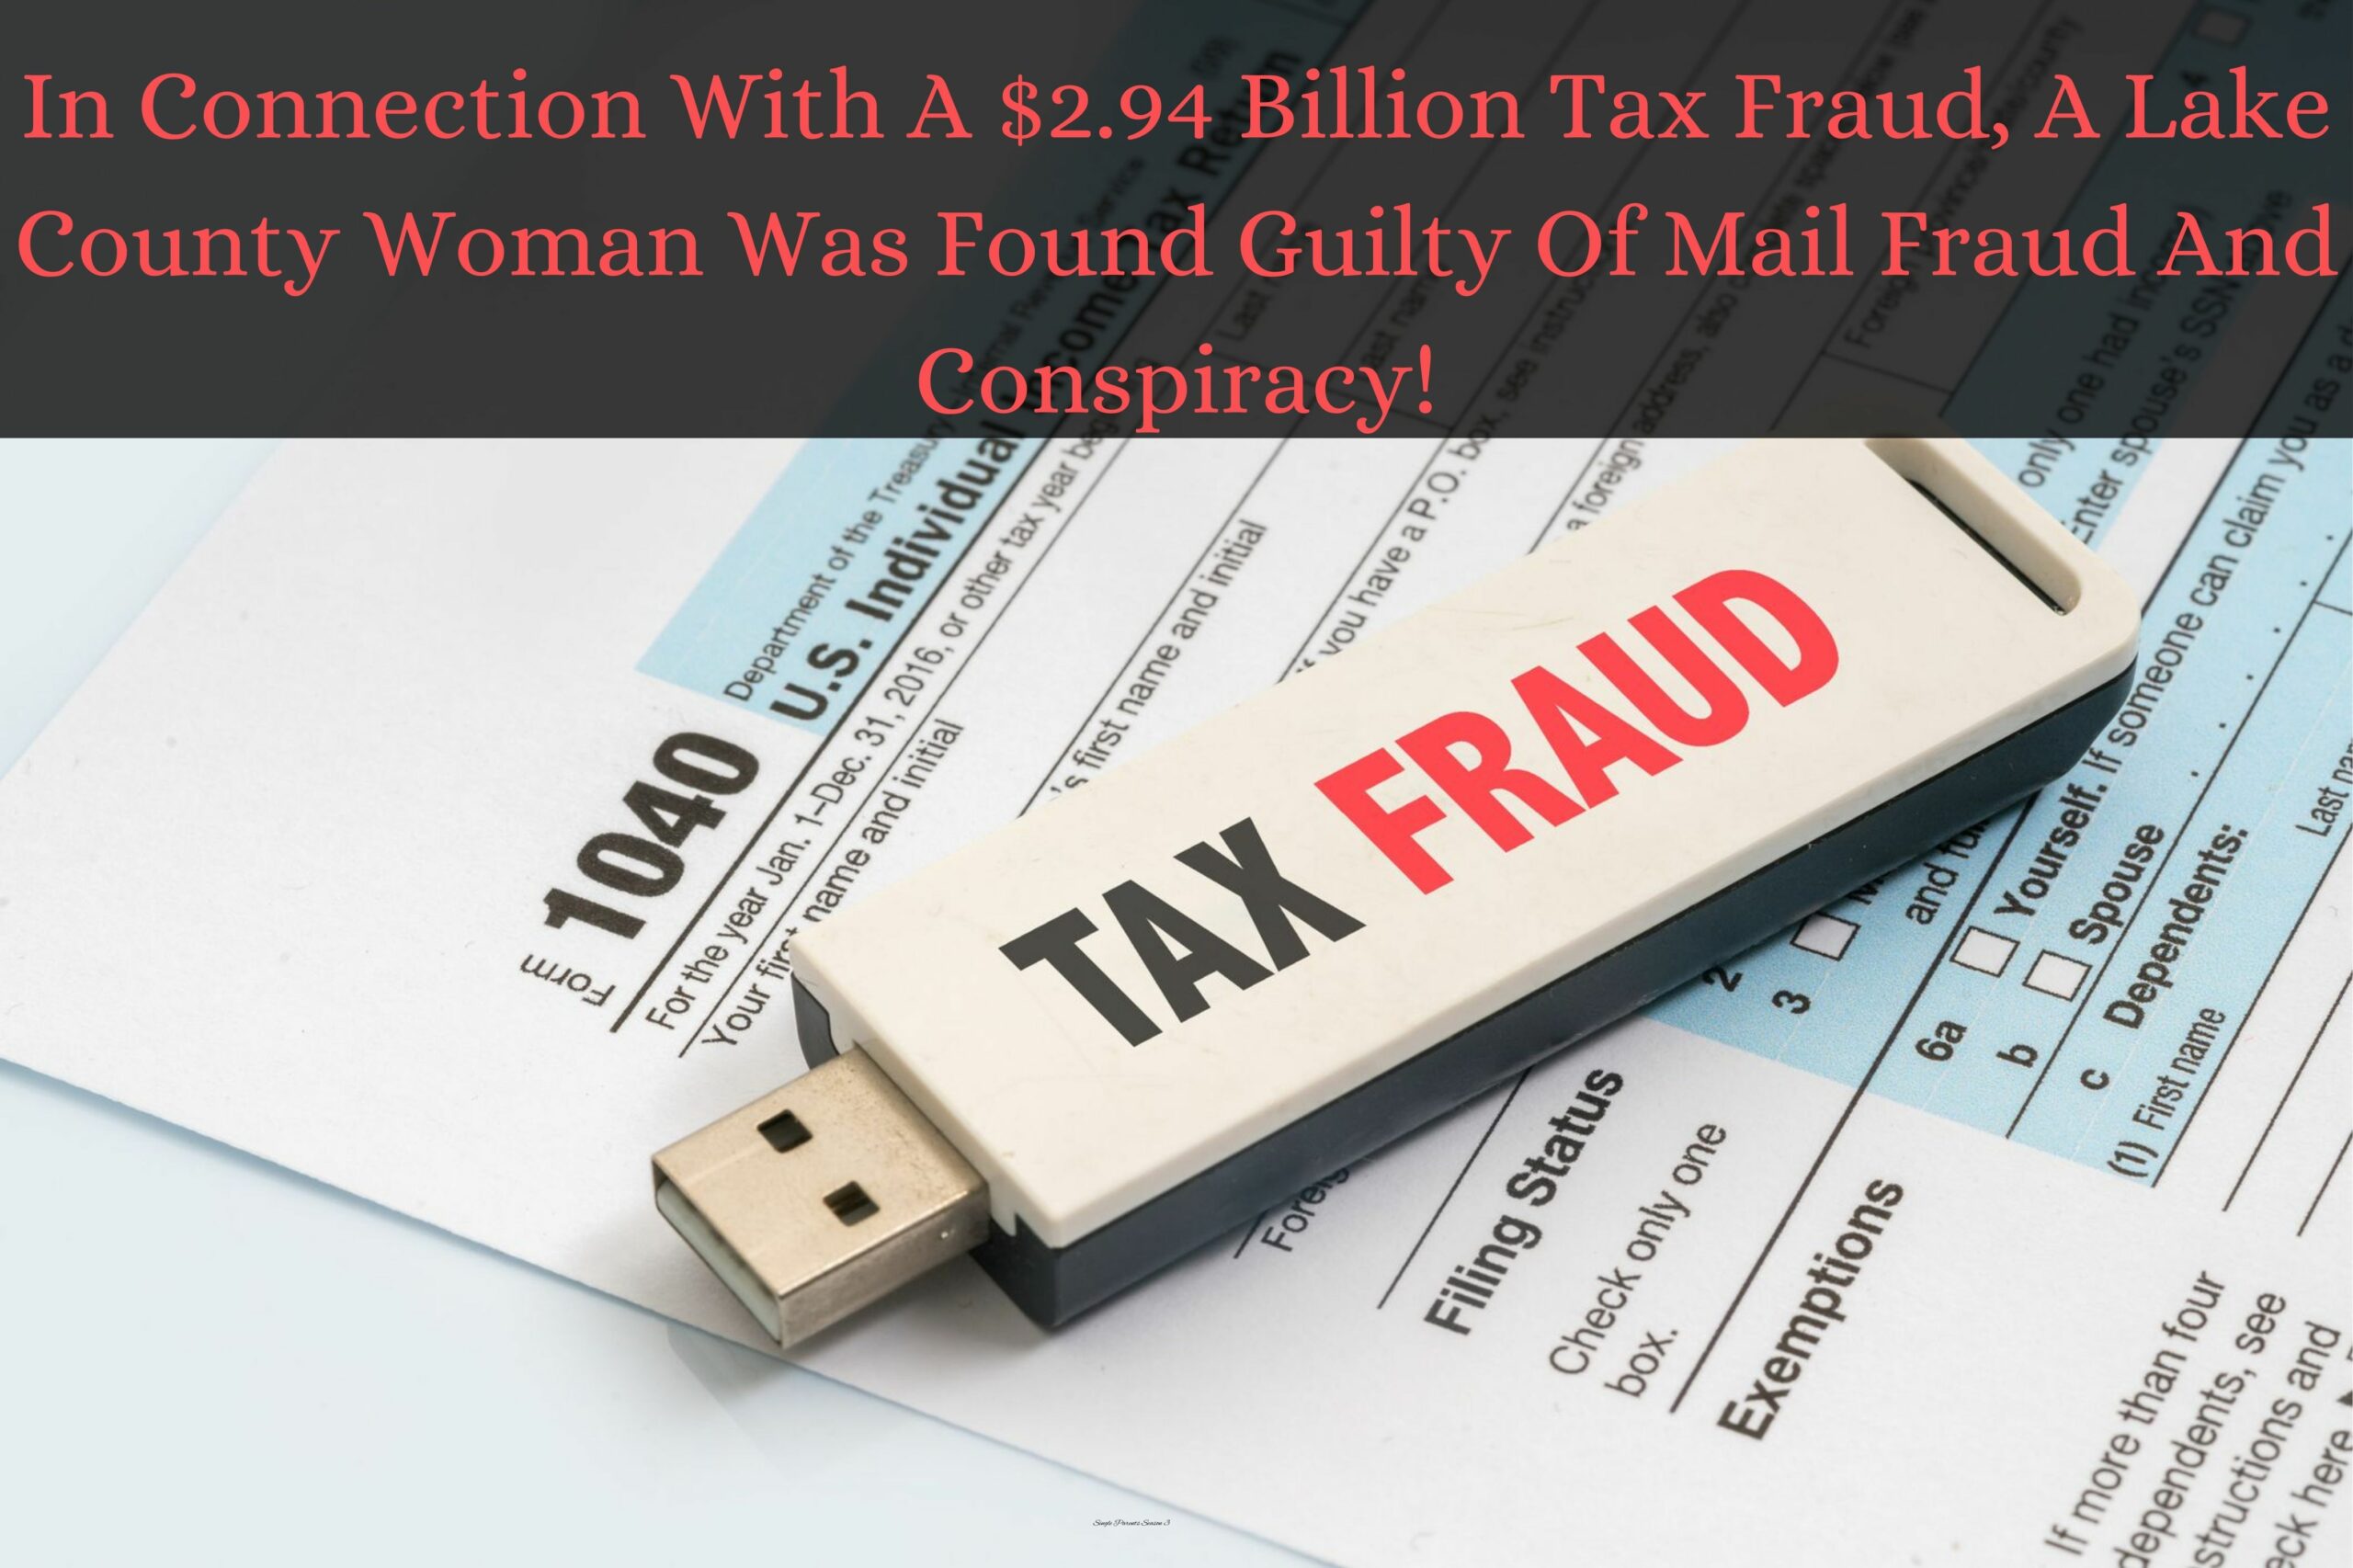 In Connection With A $2.94 Billion Tax Fraud, A Lake County Woman Was Found Guilty Of Mail Fraud And Conspiracy!